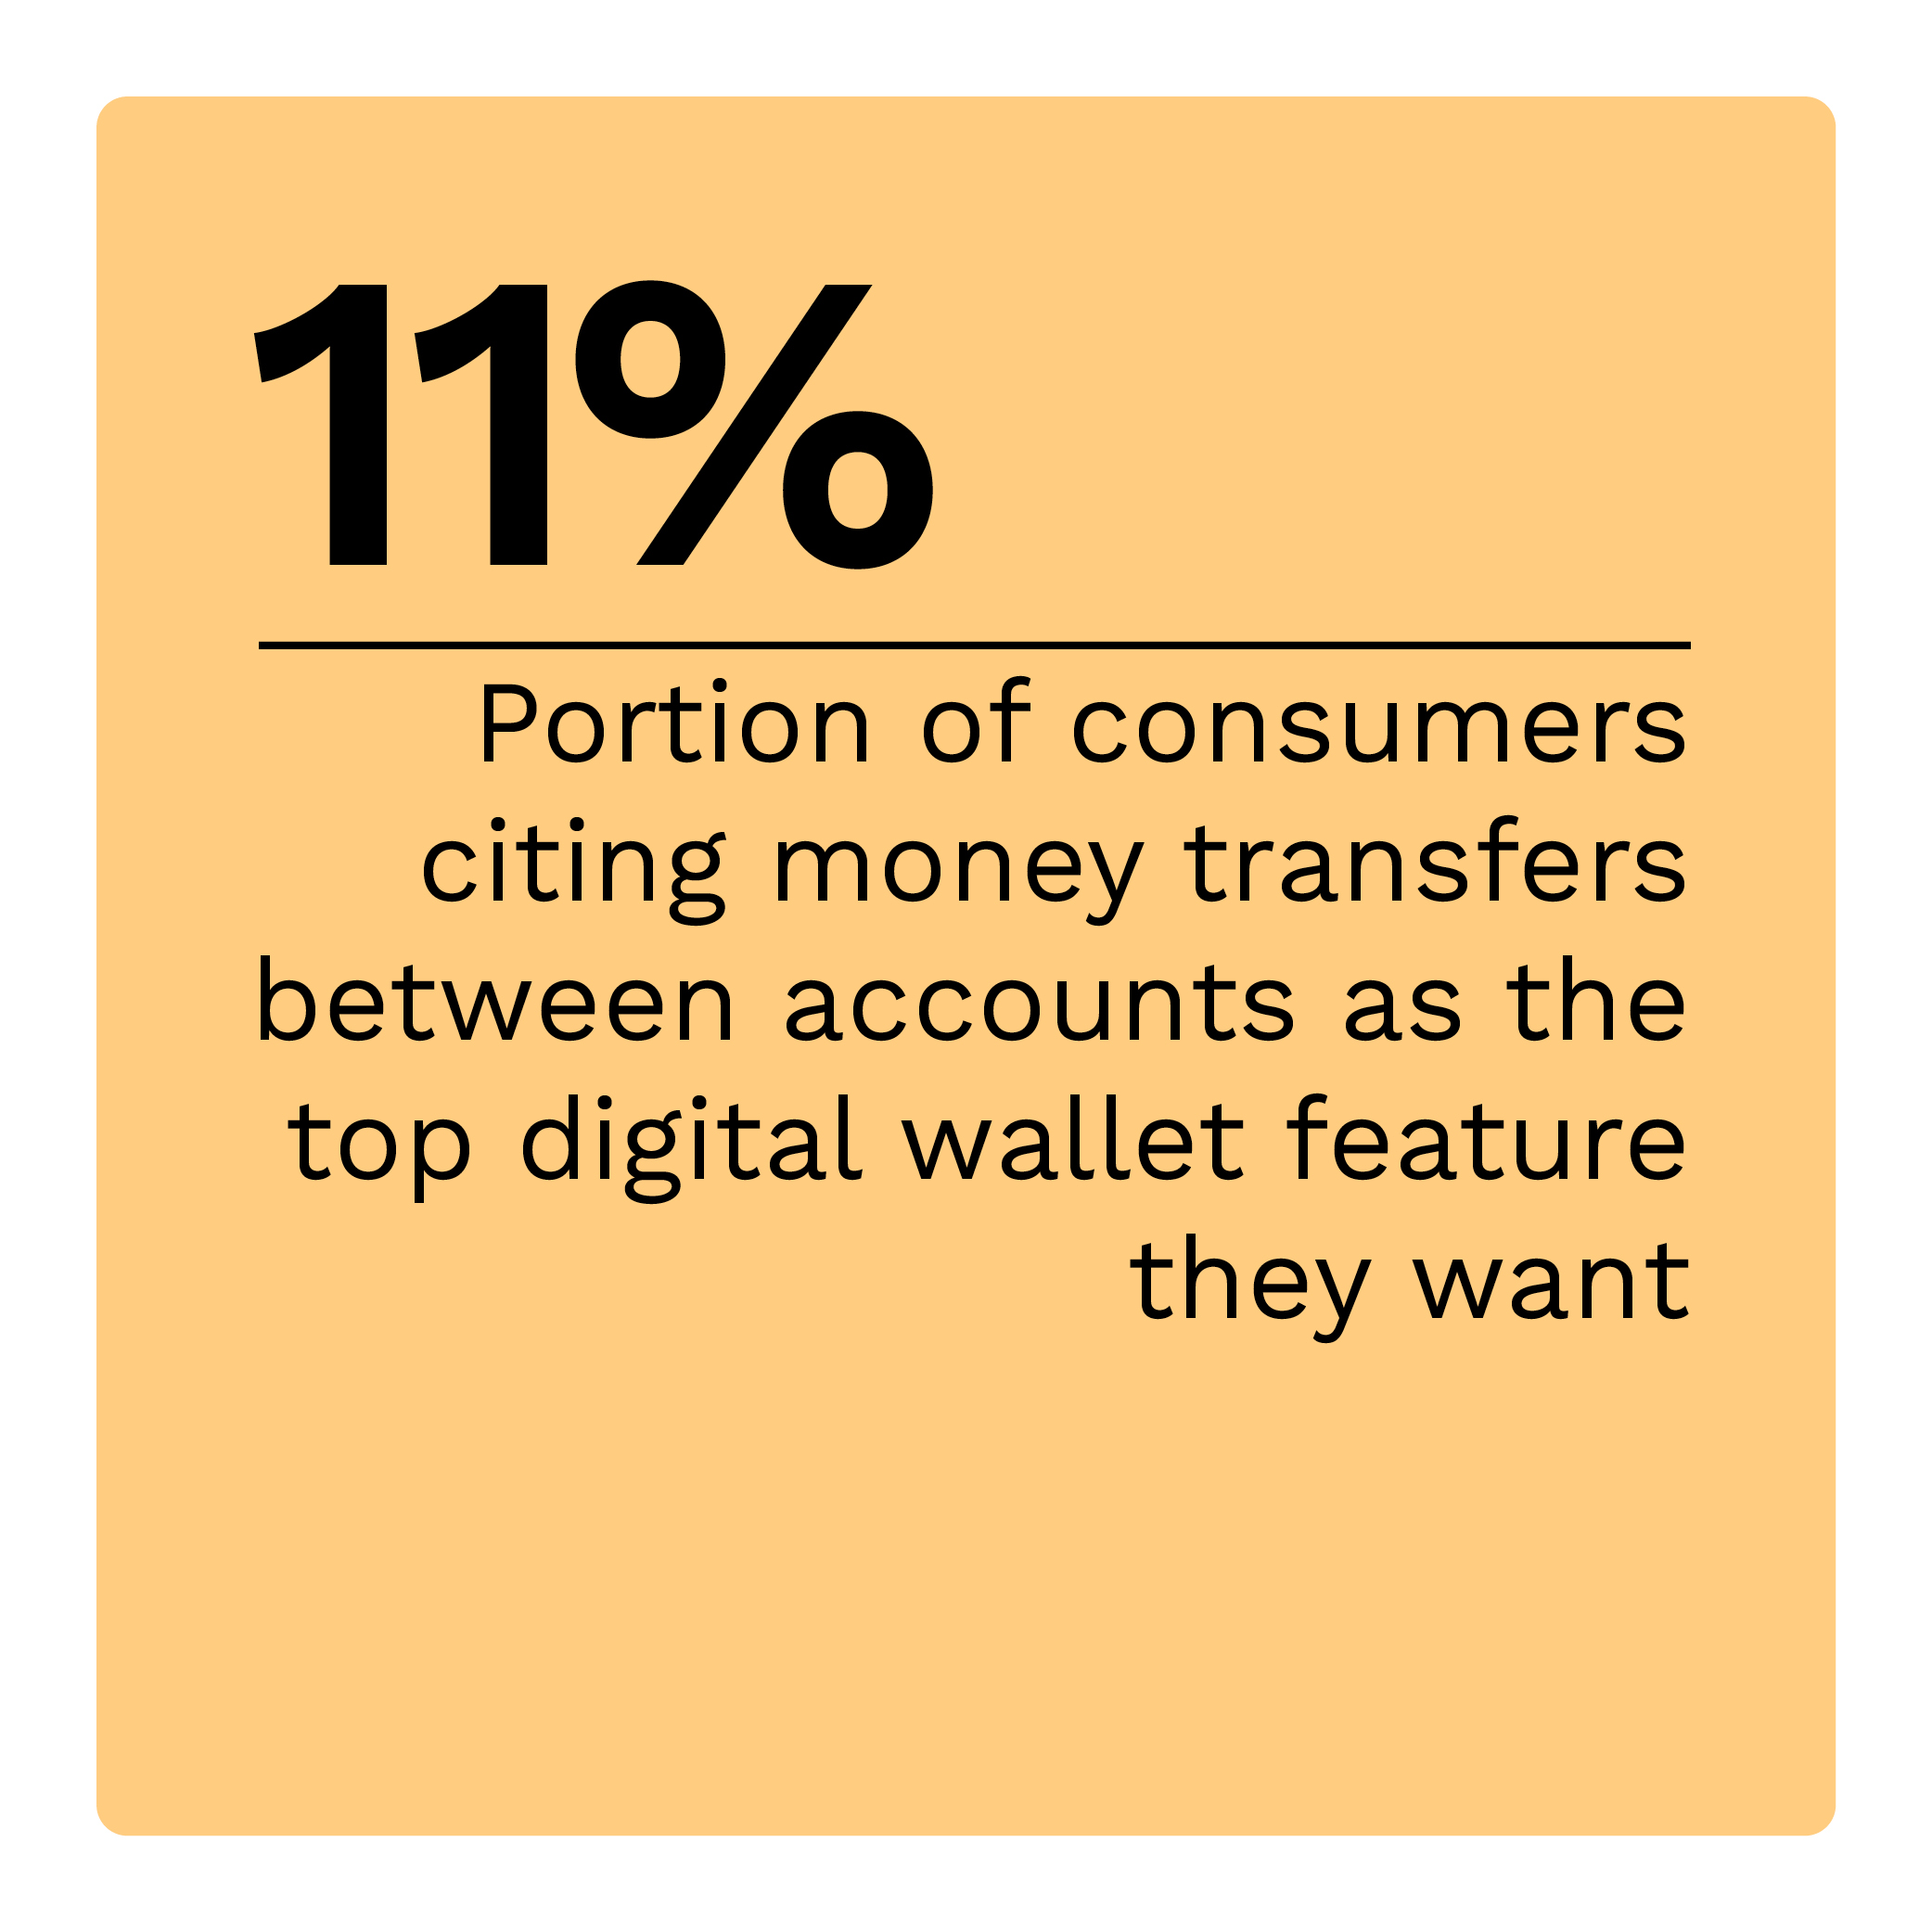 11%: Portion of consumers citing money transfers between accounts as the top digital wallet feature they want